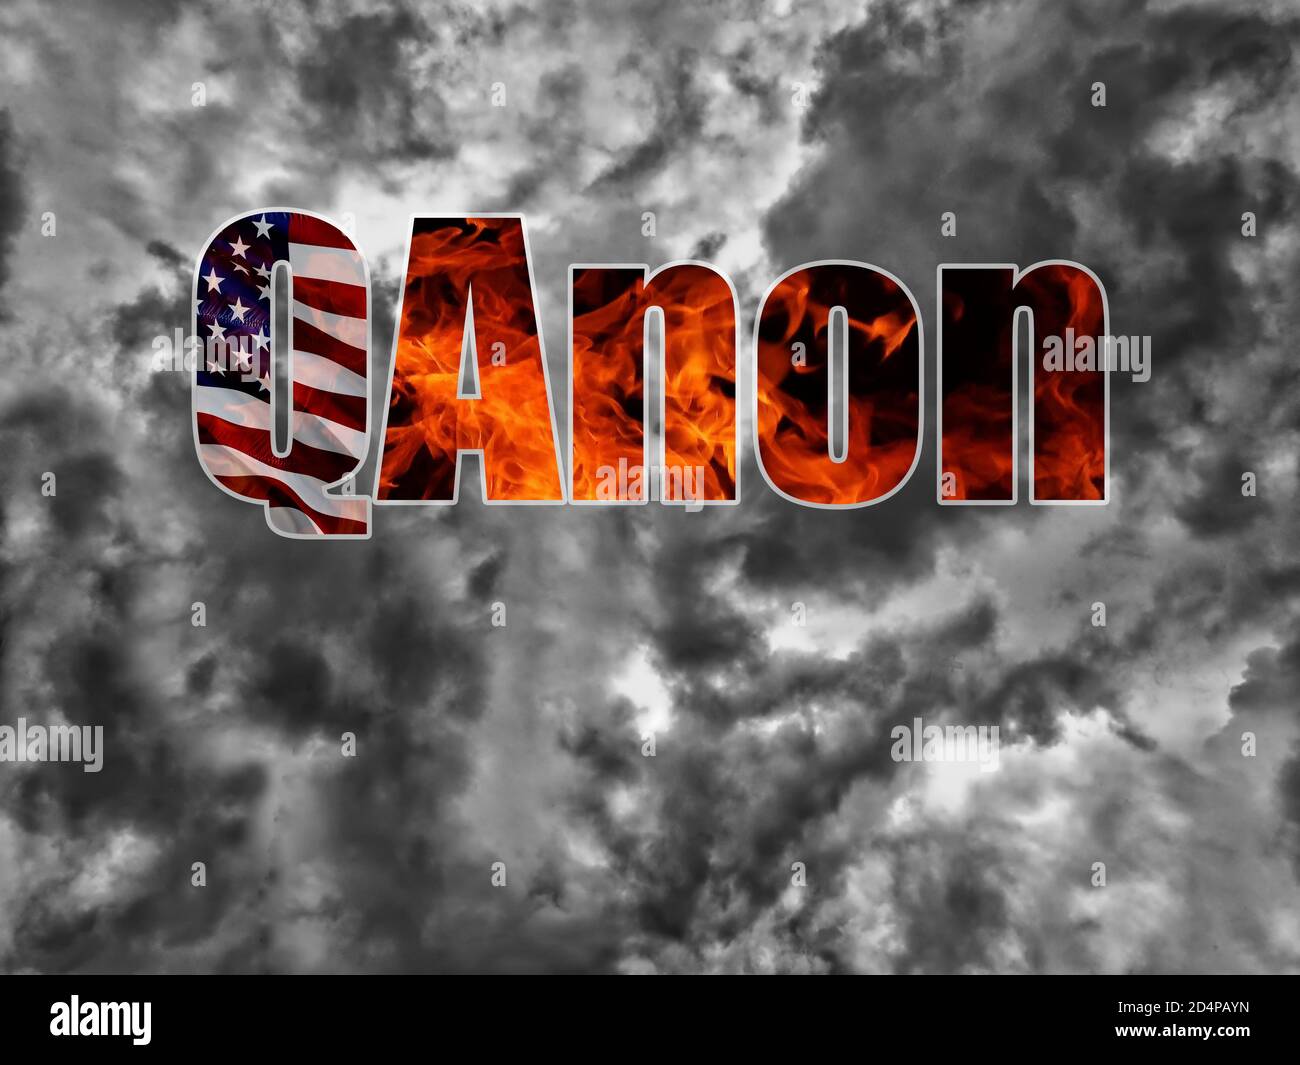 QAnon or Q Anon deep state conspiracy theory waving usa flag against dramatic sky Stock Photo